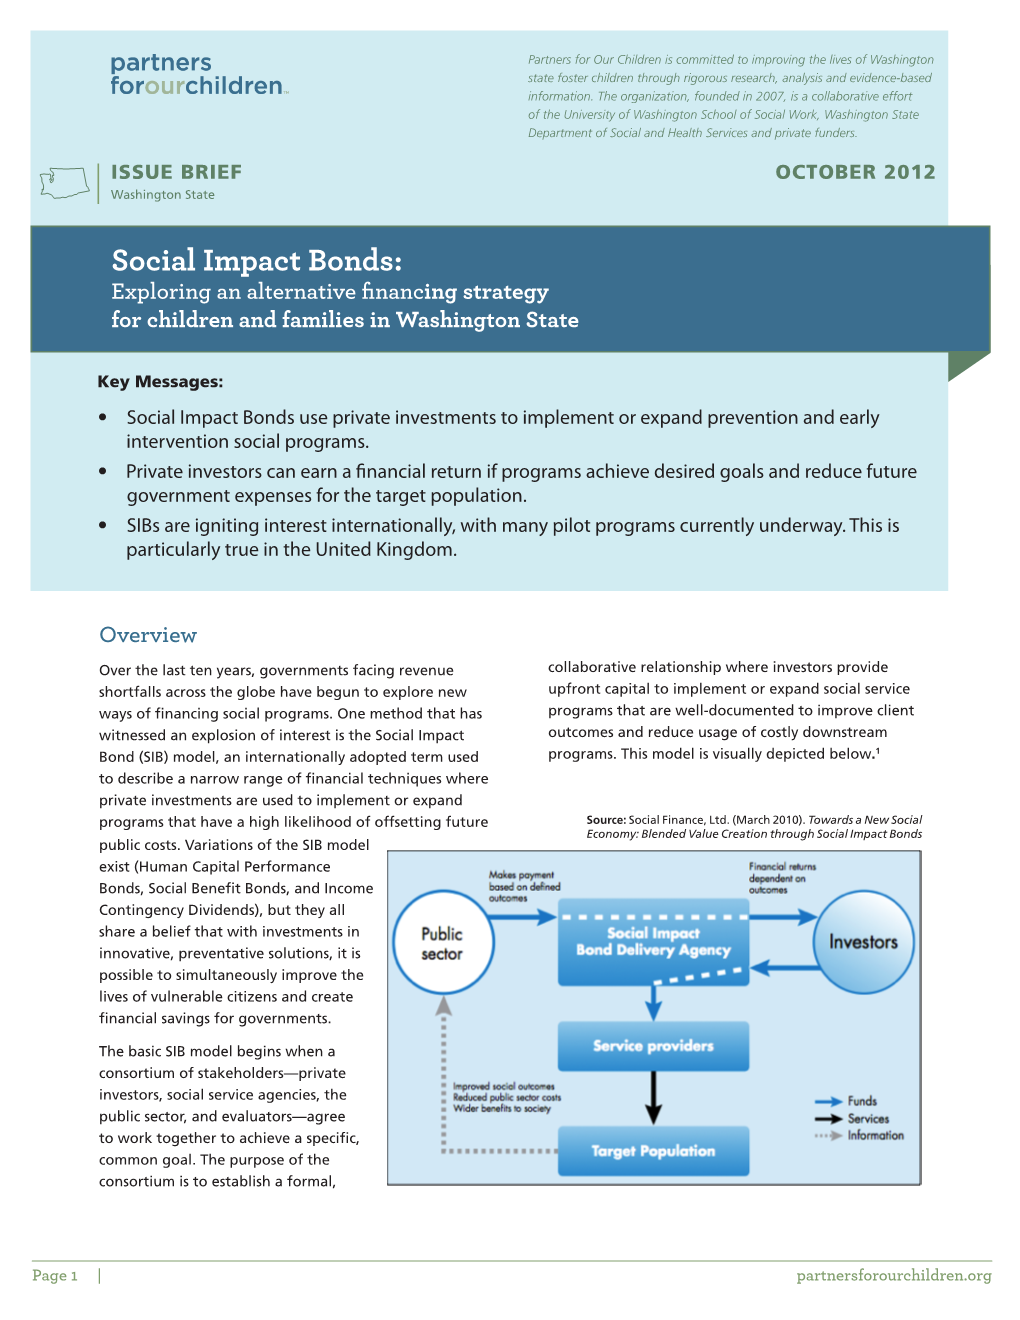 Social Impact Bonds: Exploring an Alternative Financing Strategy for Children and Families in Washington State